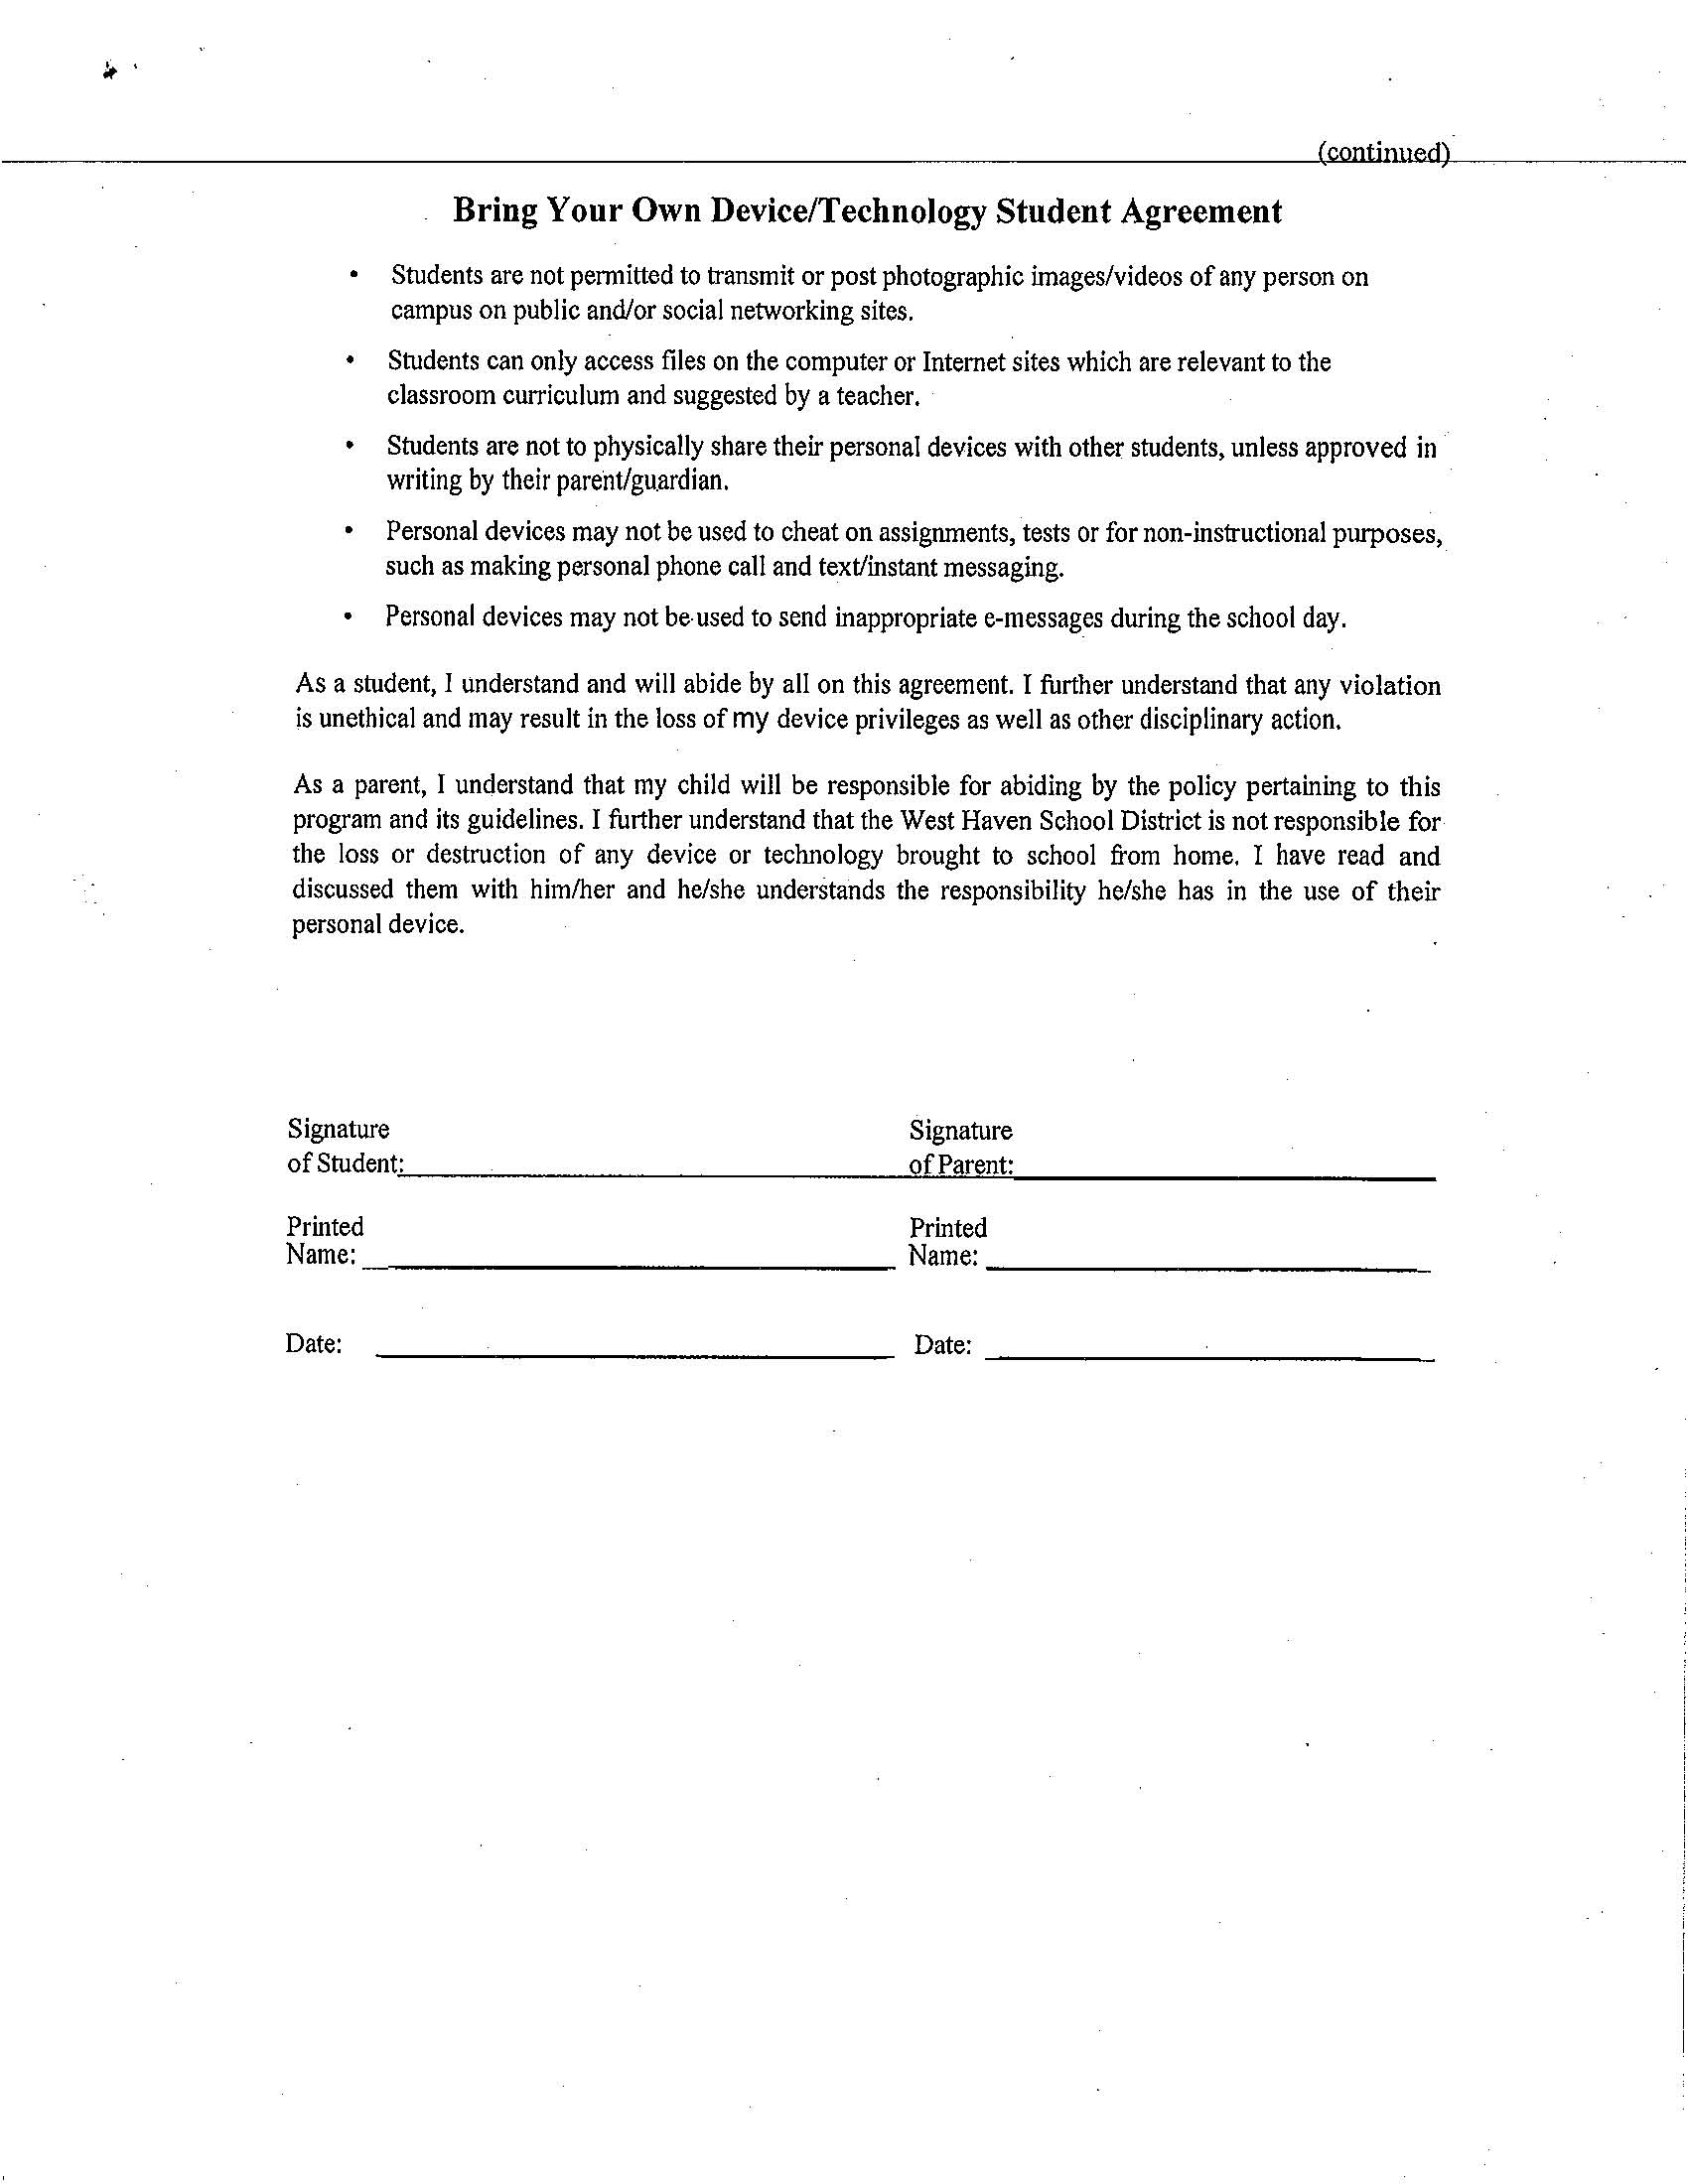 Byod Agreement Form Od Bring Your Own Device May V Carrigan Intermediate School